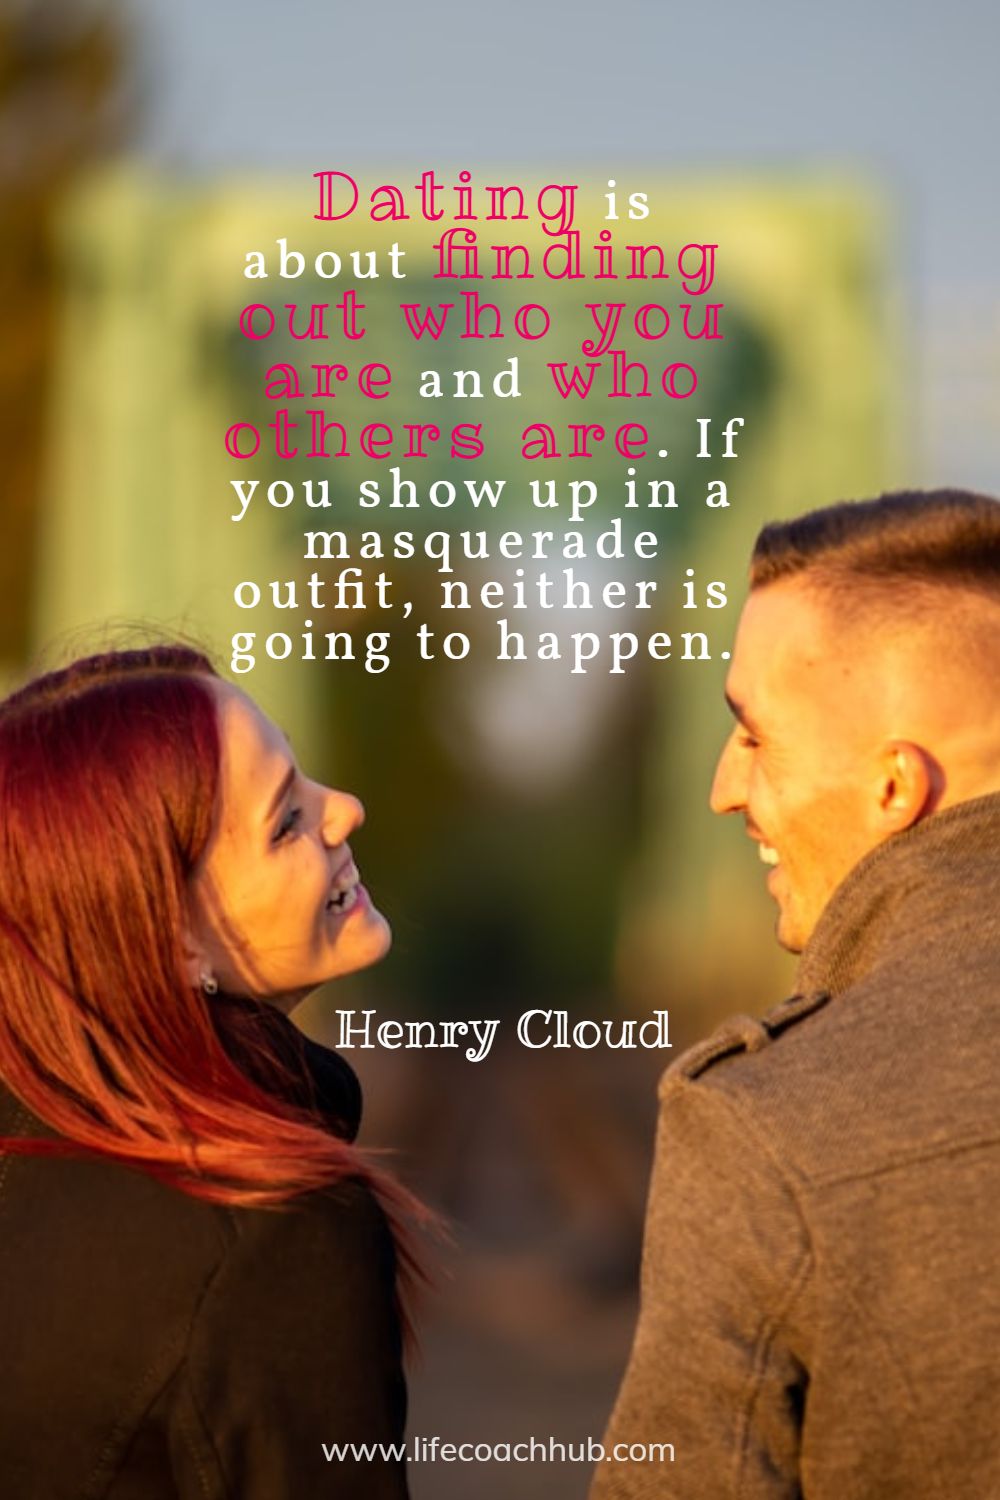 Dating is about finding out who you are and who others are. If you show up in a masquerade outfit, neither is going to happen. Henry Cloud Coaching Quote